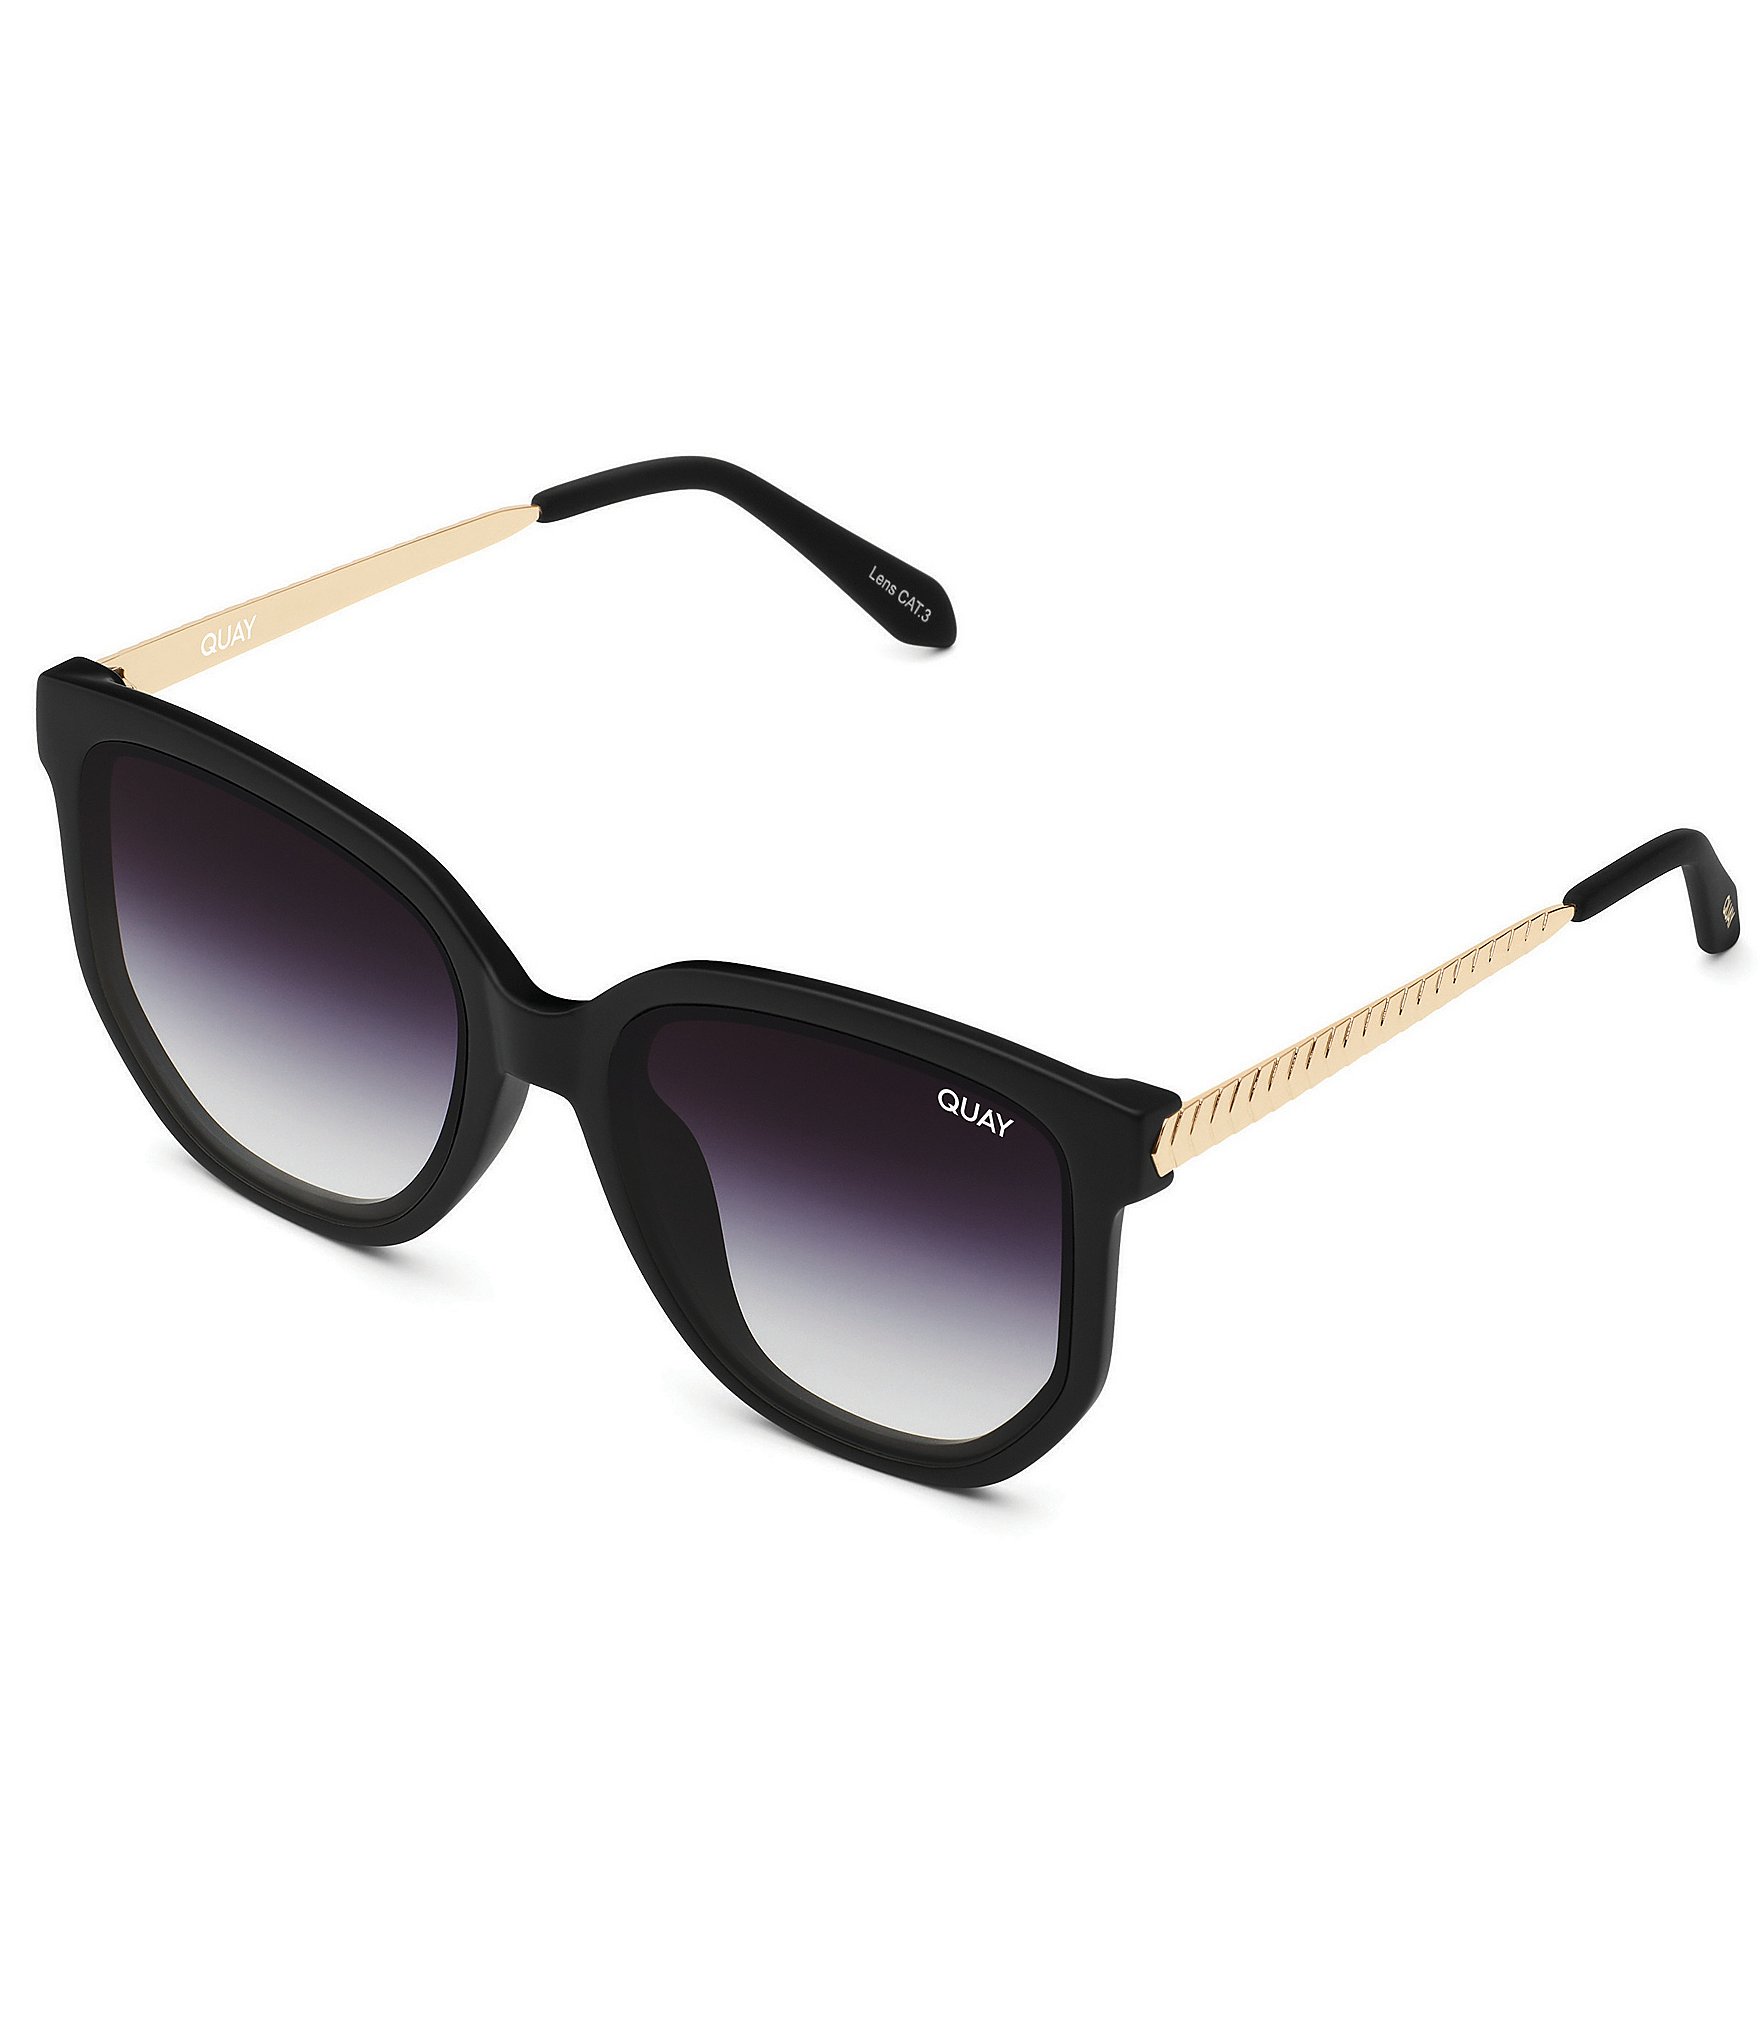 Quay Australia Sunglasses That We Can't Wait to Wear This Summer